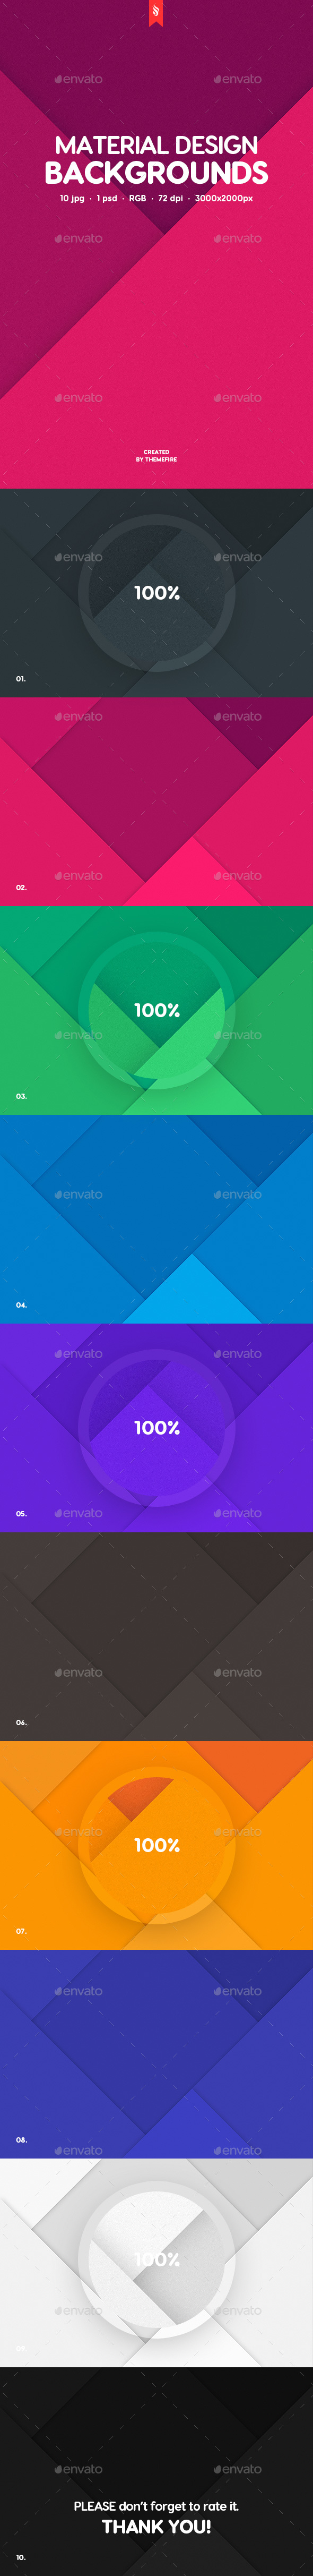 10 Material Design Backgrounds